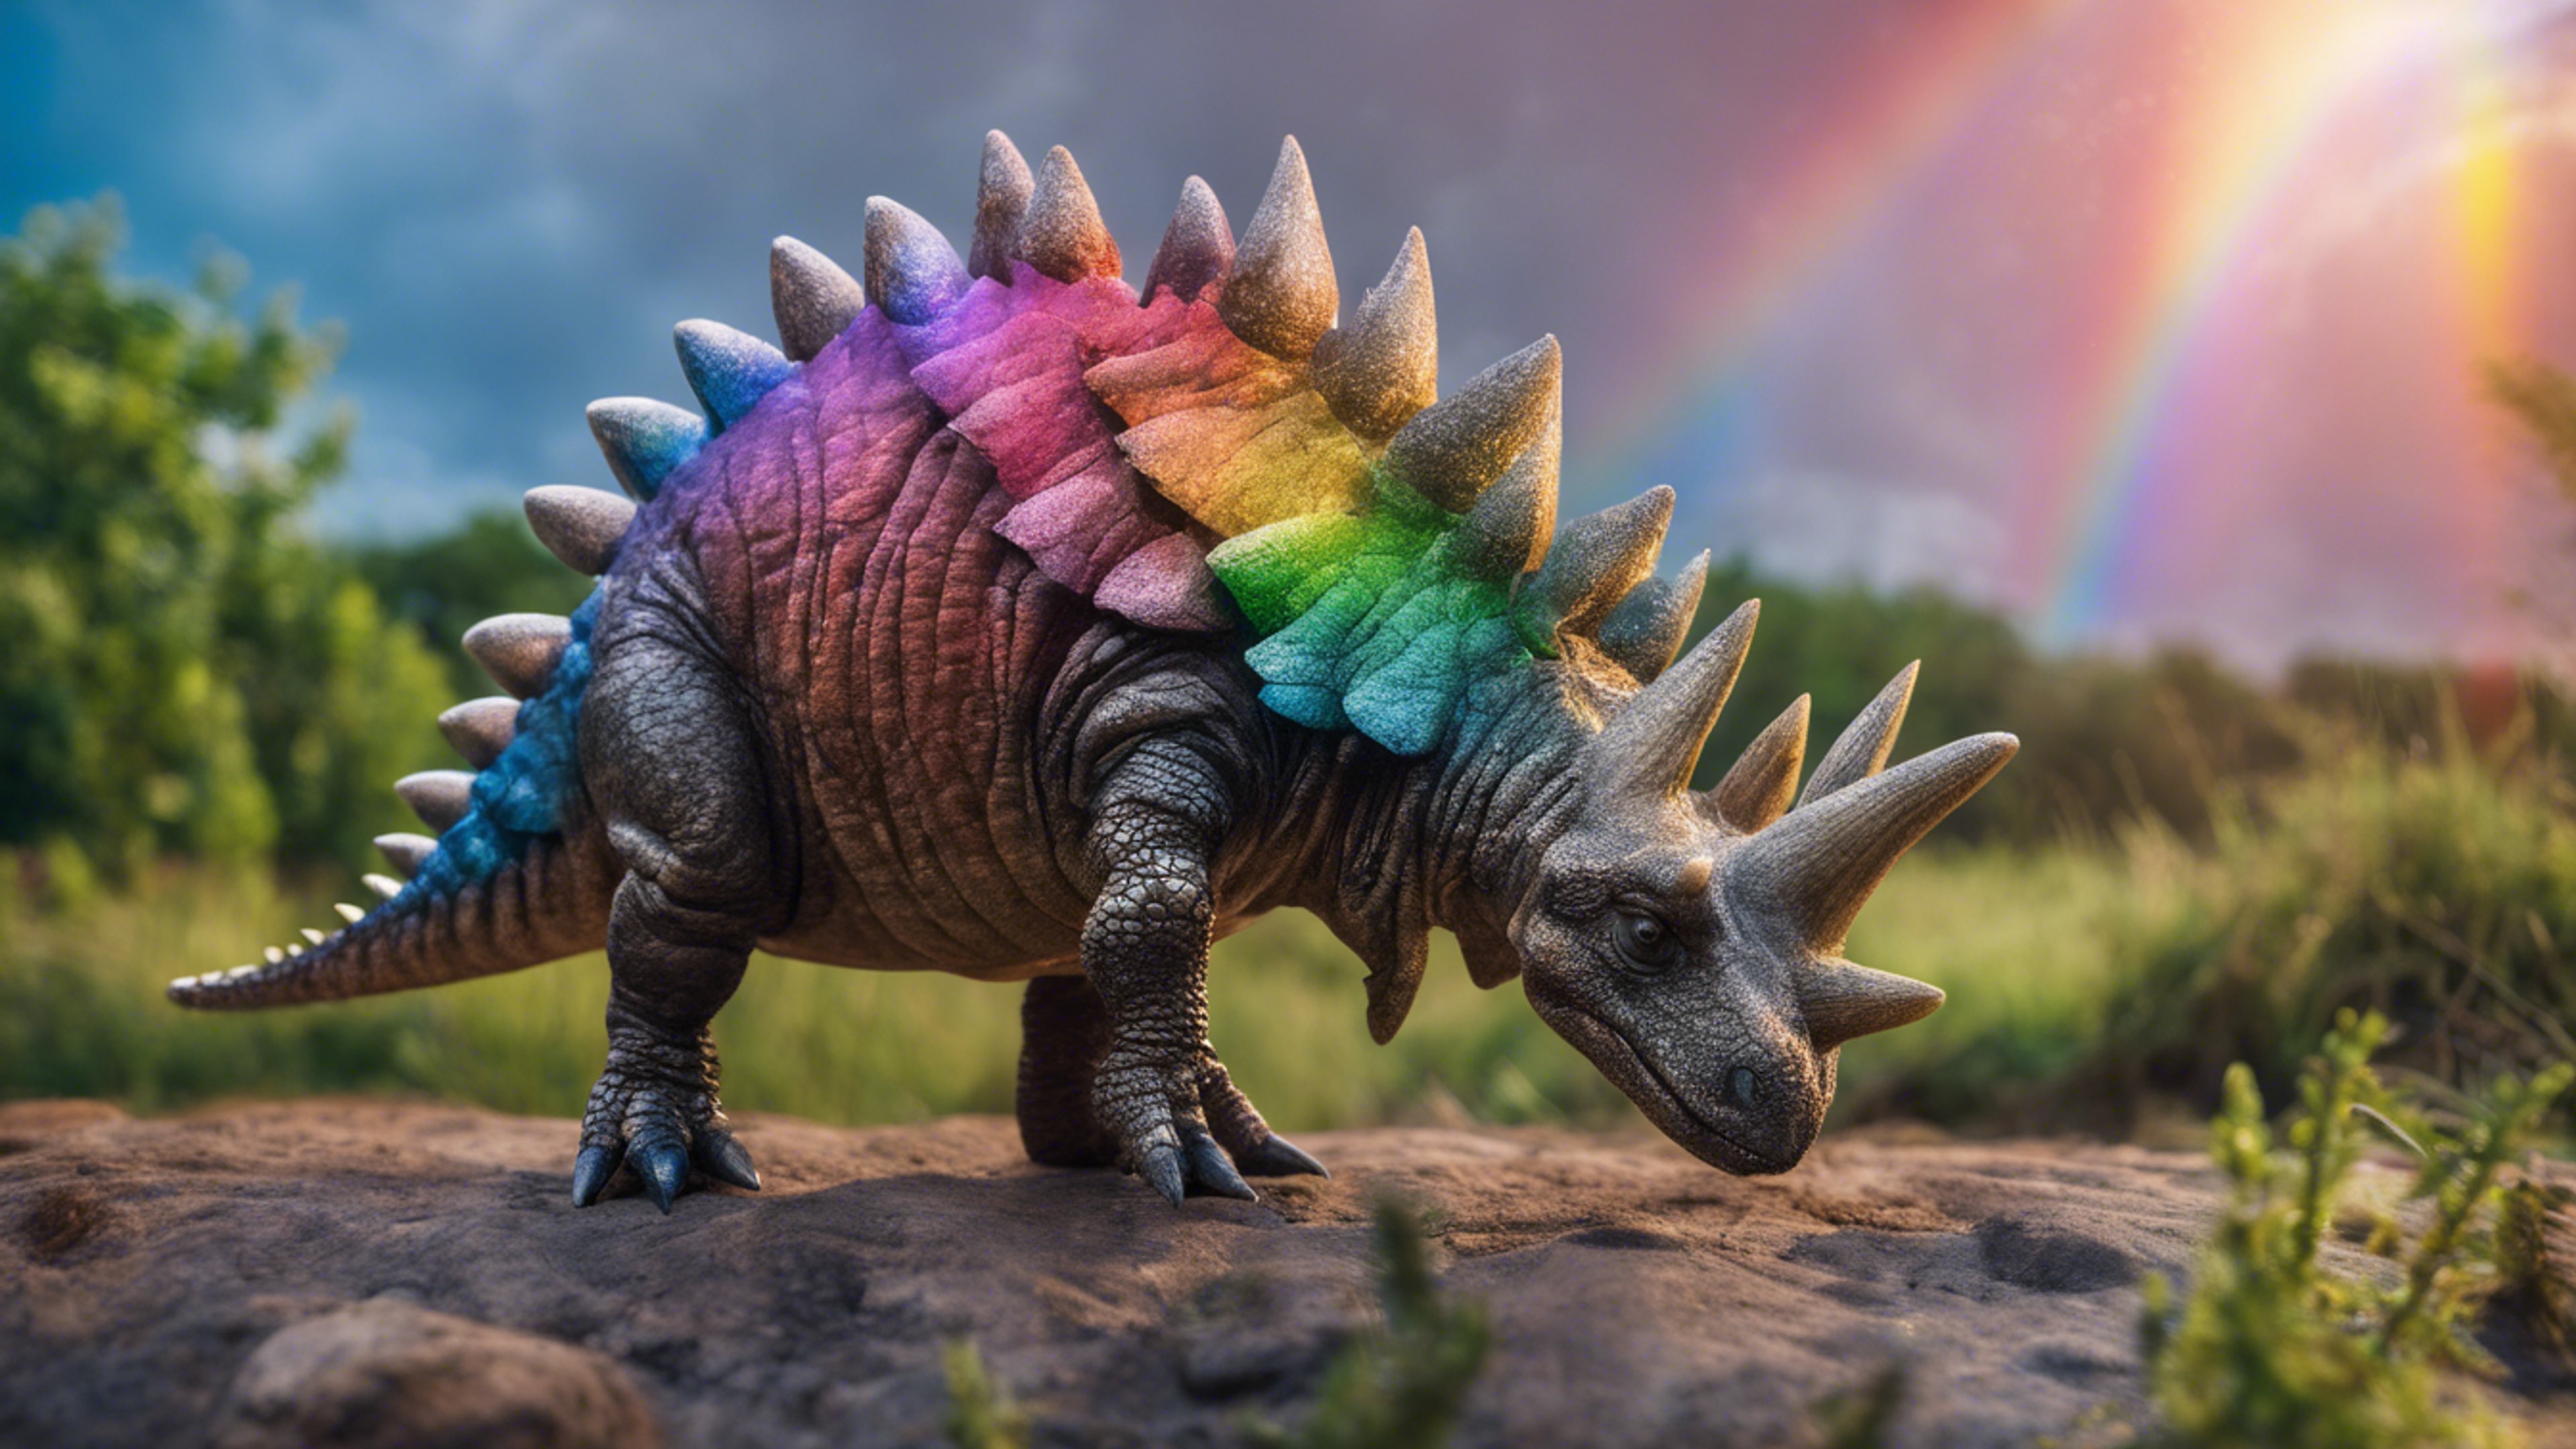 A Stegosaurus under a magnificent rainbow, with scales that match the rainbow's colors. Wallpaper[90c377aec5ac43fa97b8]